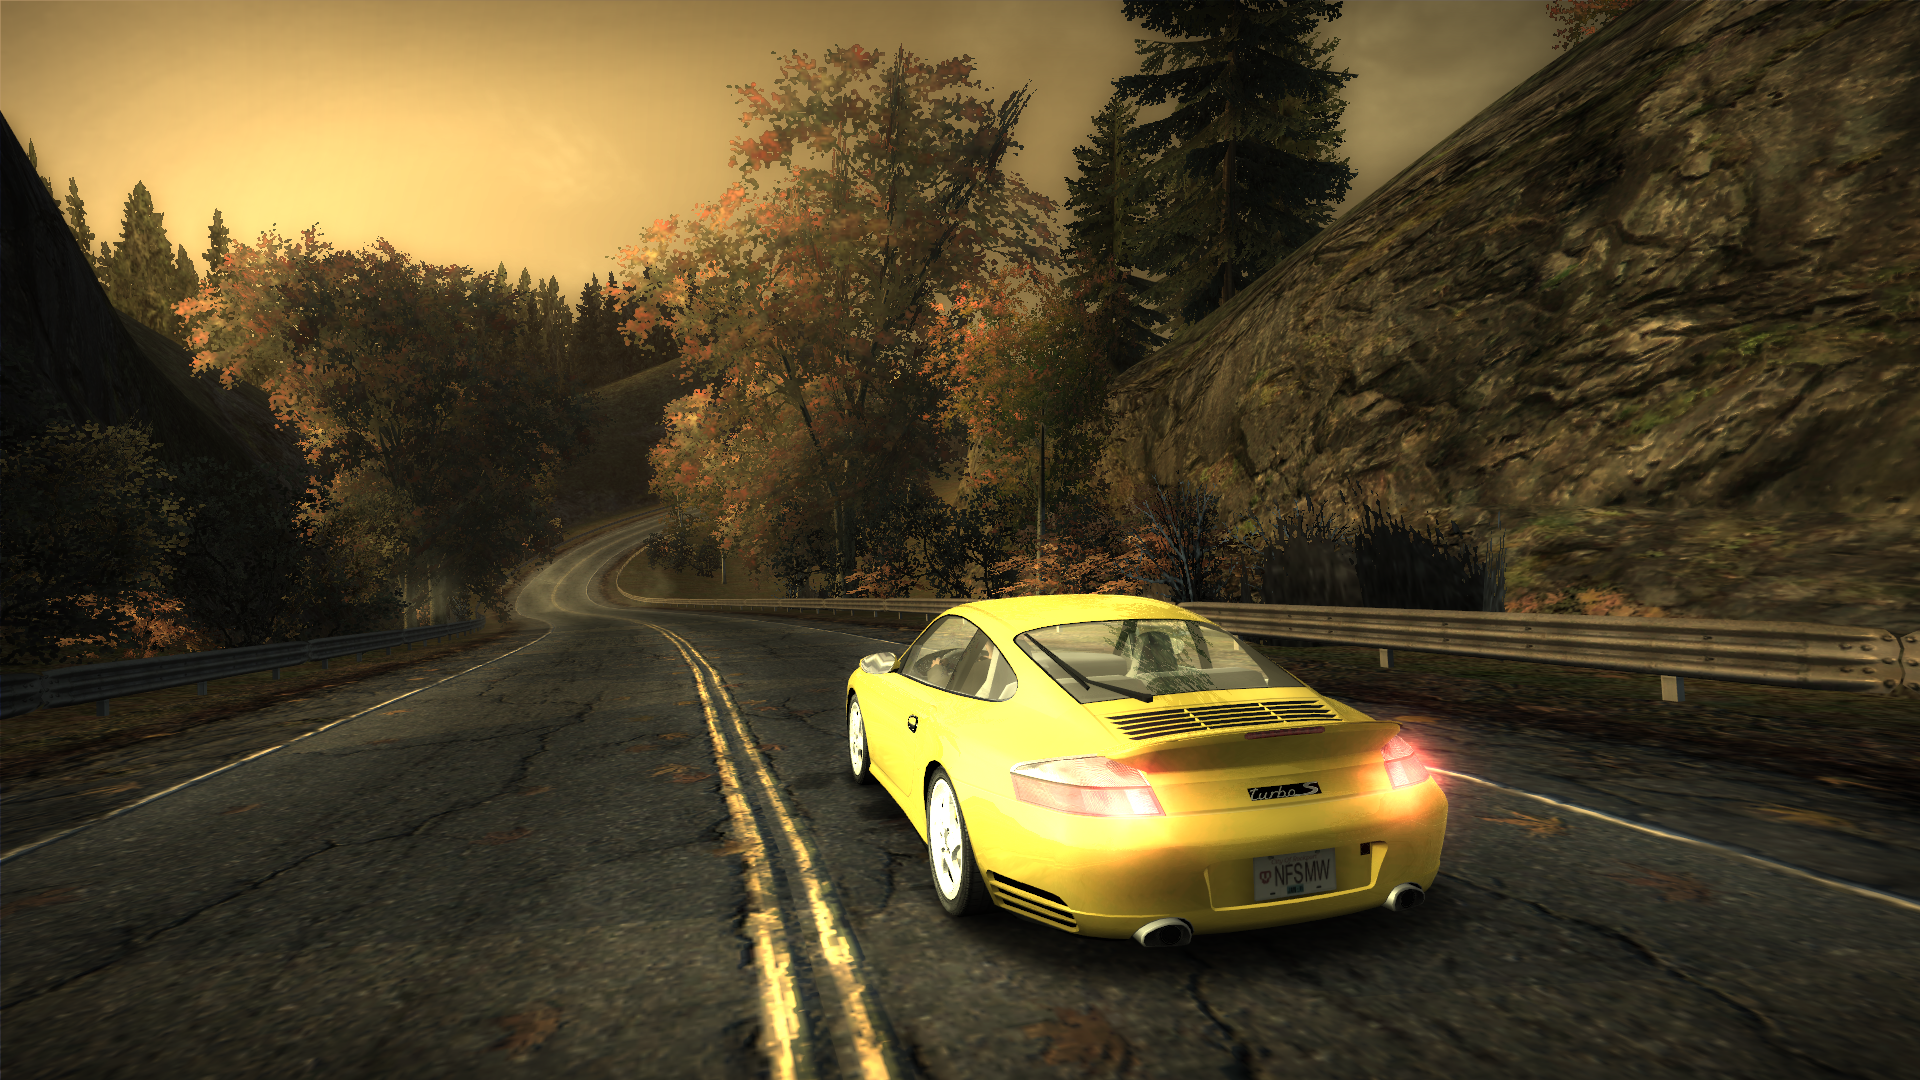 Nfs assemble. Нид фор СПИД most wanted 2005. Нфс МВ 2005. Гонки NFS most wanted 2005. Новый NFS most wanted 2005.